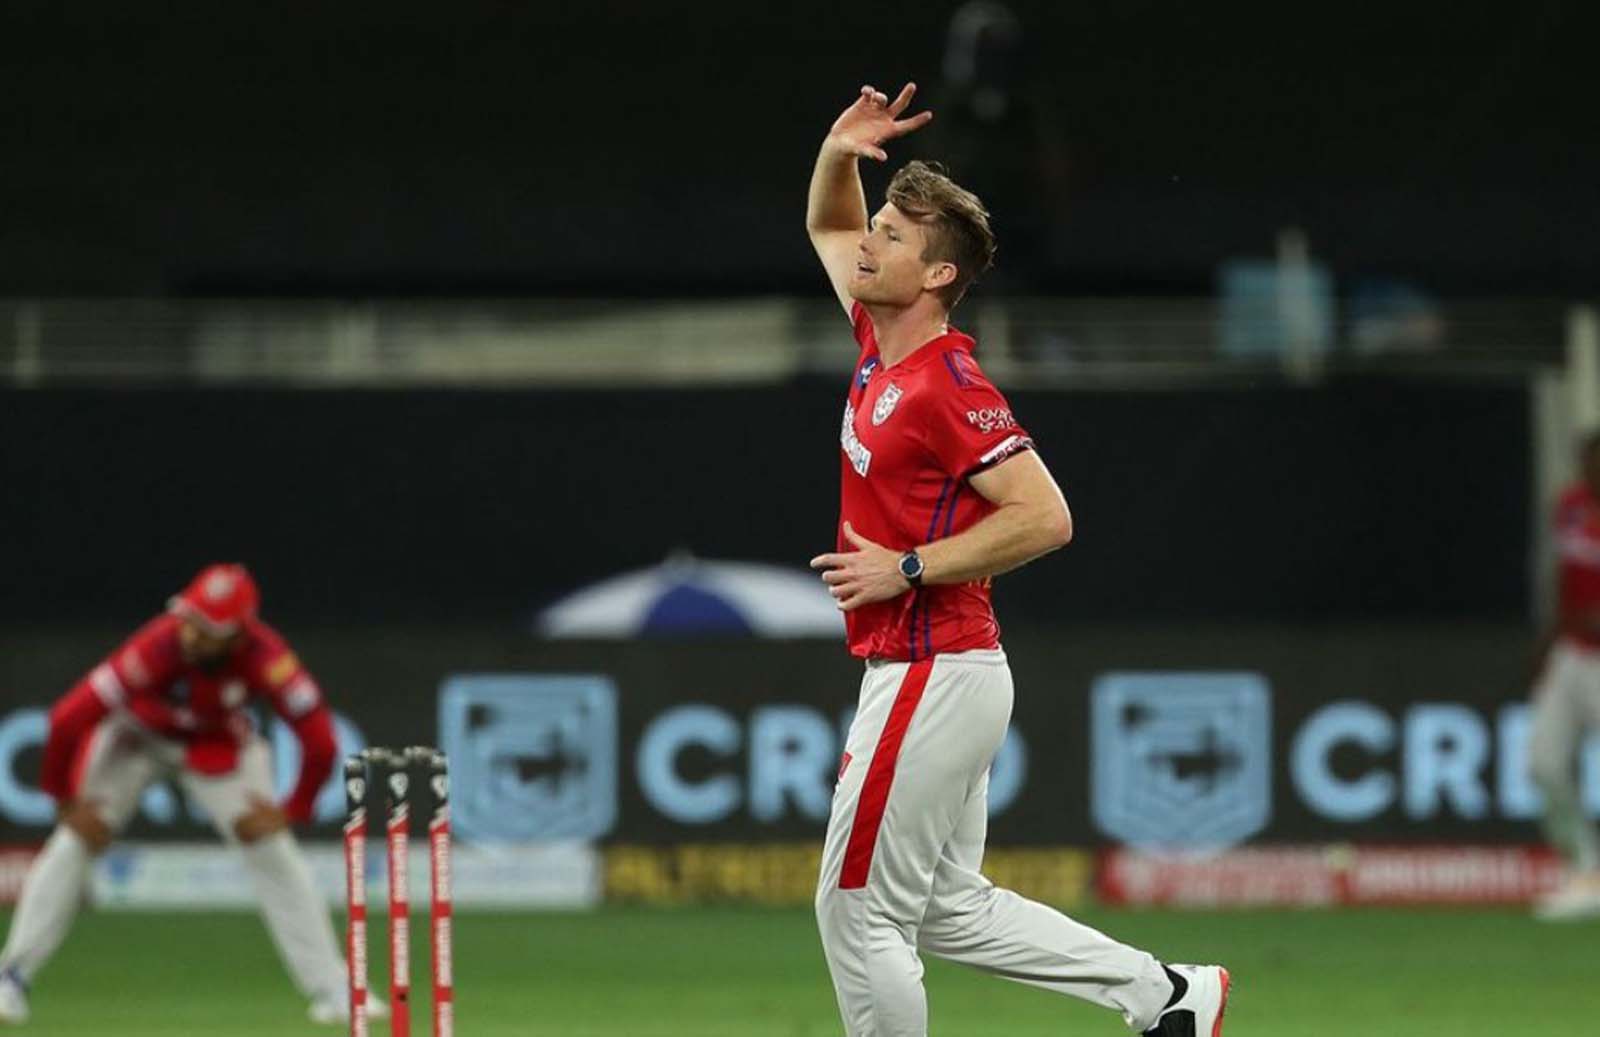 ‘I’m Dead Inside’ – James Neesham Reacts After KXIP Beats MI In a Thrilling Game